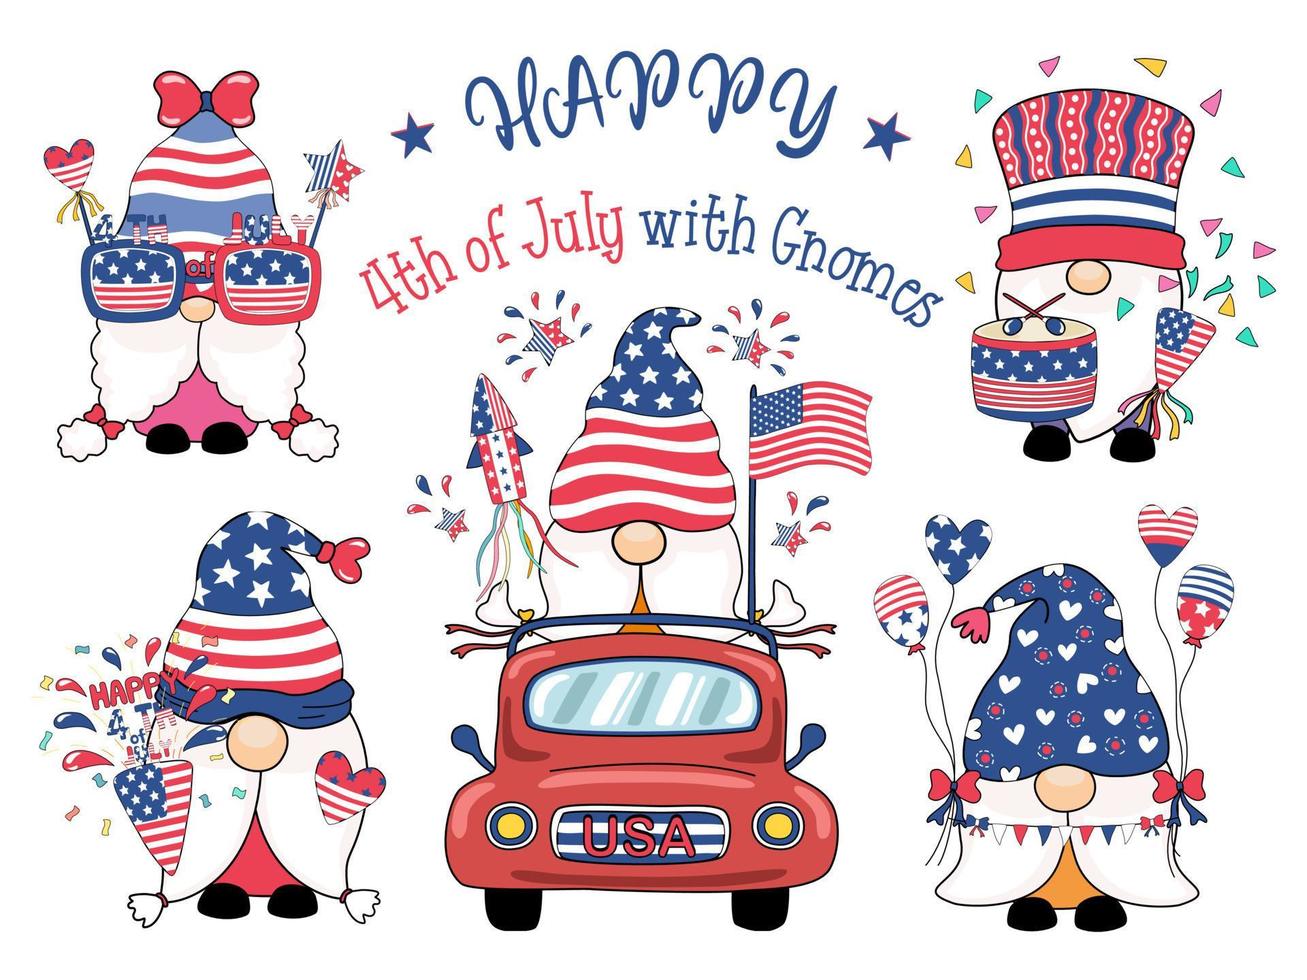 Happy 4th of July with gnomes Designed in doodle style, red, white, and blue tones for decoration, stickers, cards, t-shirt designs, bags, fabric patterns, gifts, scrapbooks, and more. vector